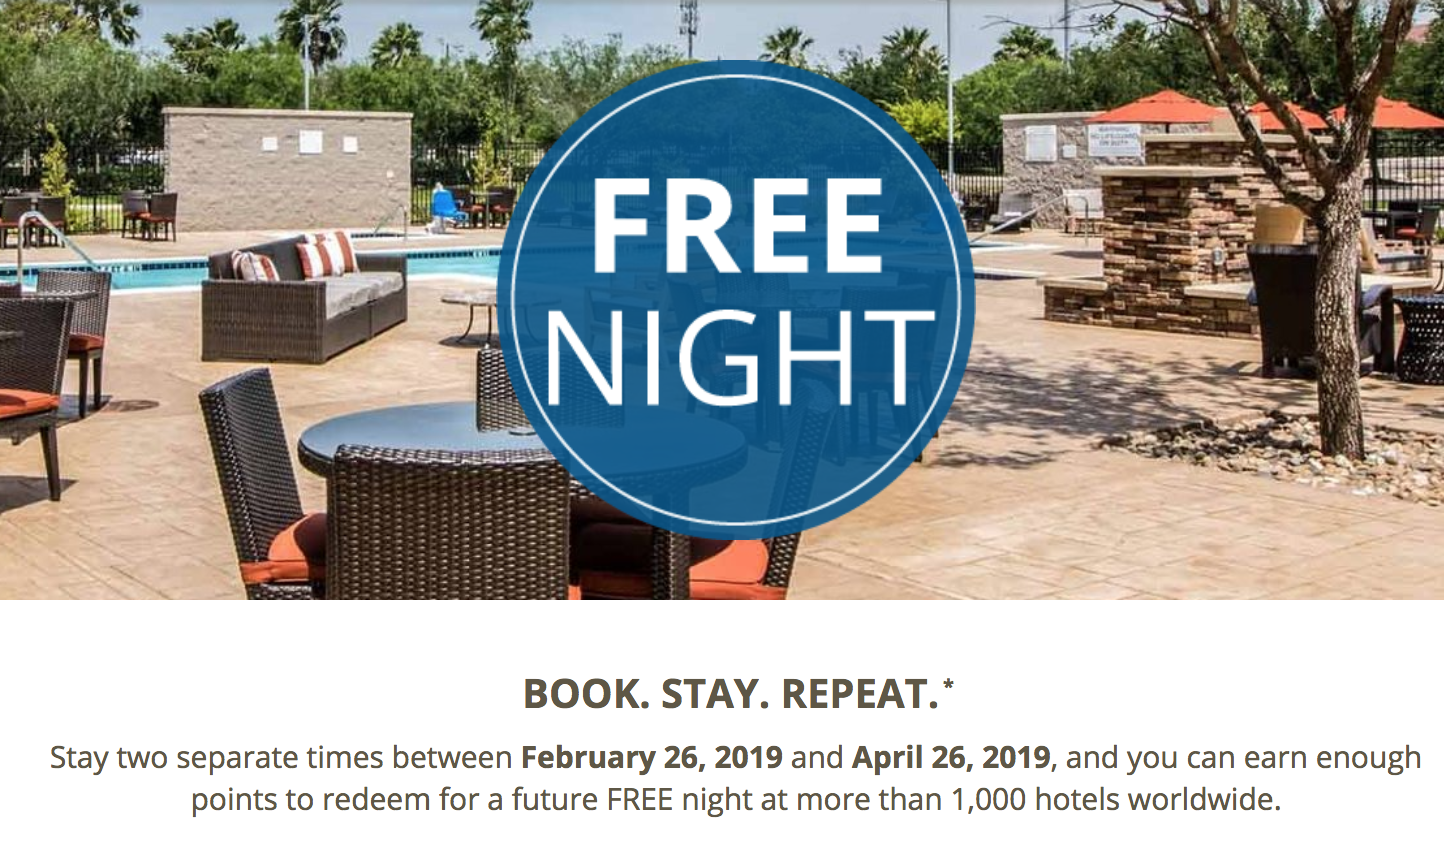 Stay Twice at Choice Hotels, Earn 8,000 Bonus Points